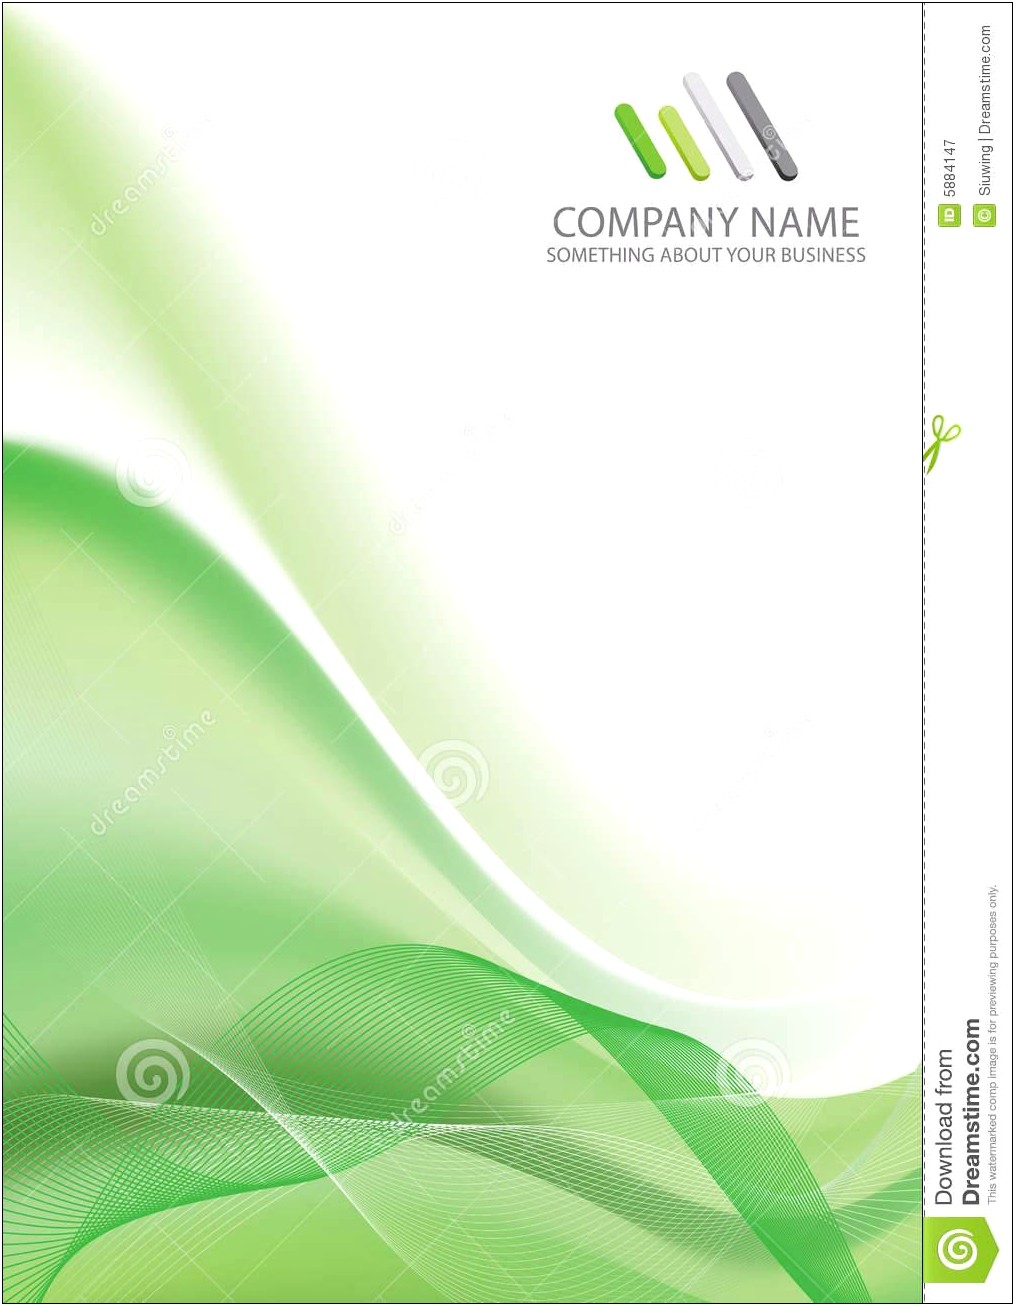 Cover Page Templates For Word 2013 Free Download